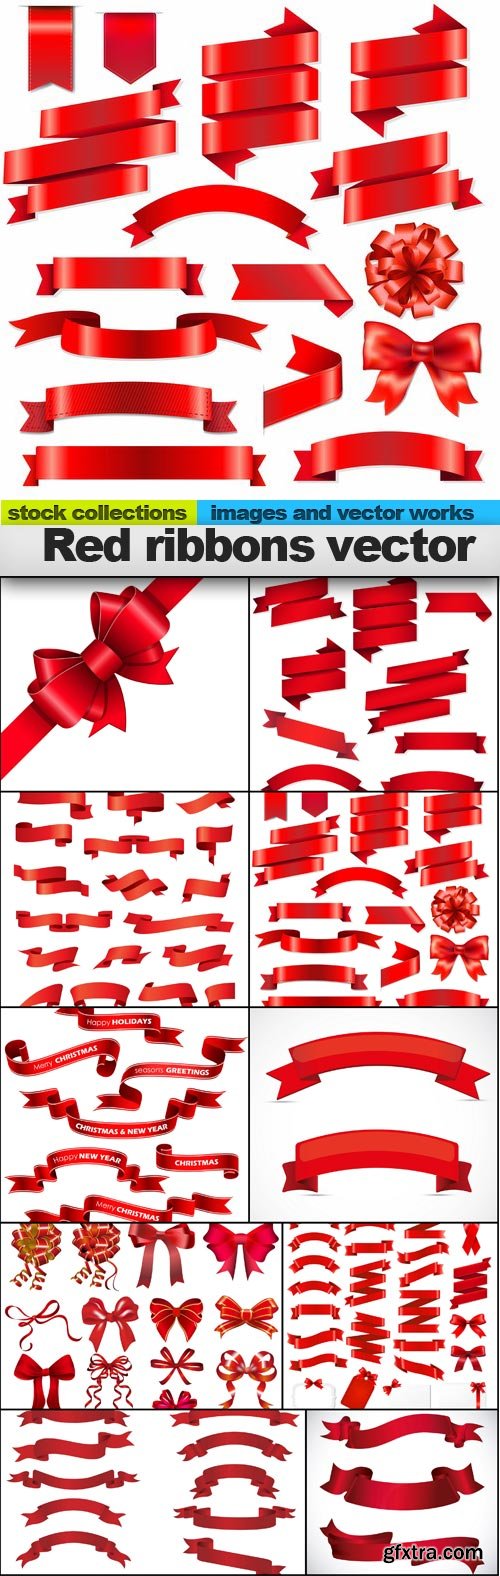 Red ribbons vector, 10 x EPS